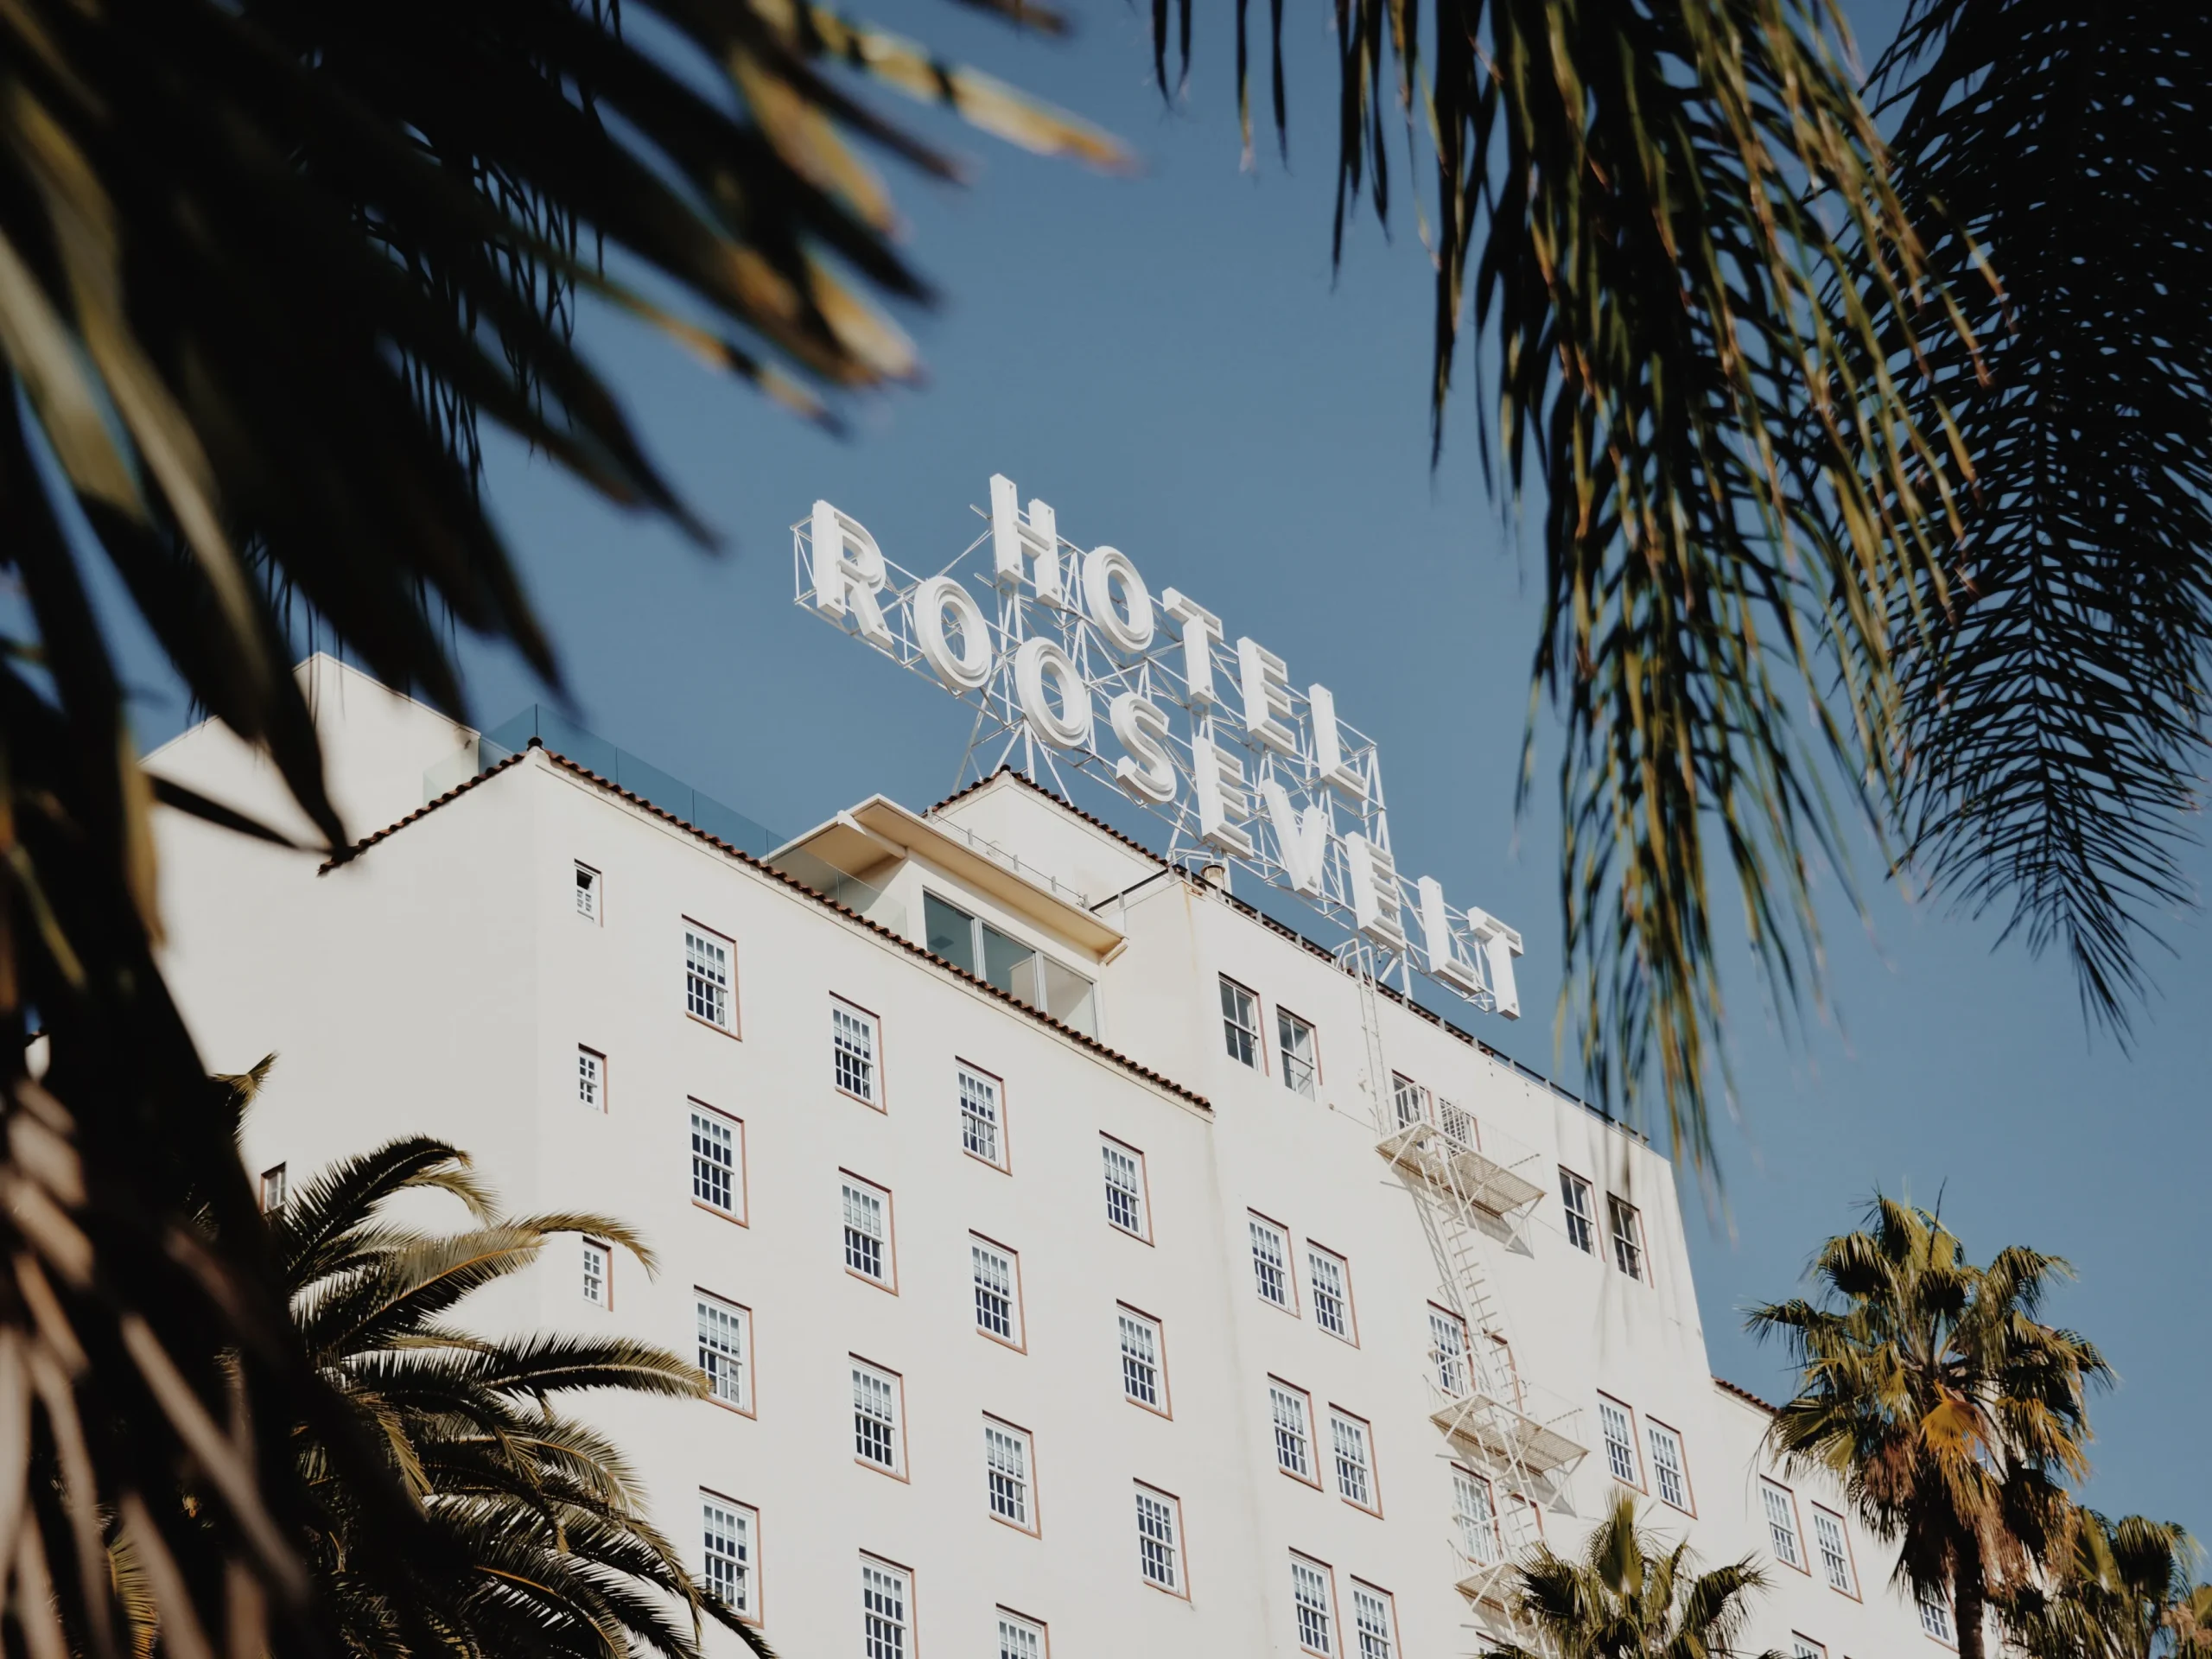 Top hotels in Los Angeles for your stay.